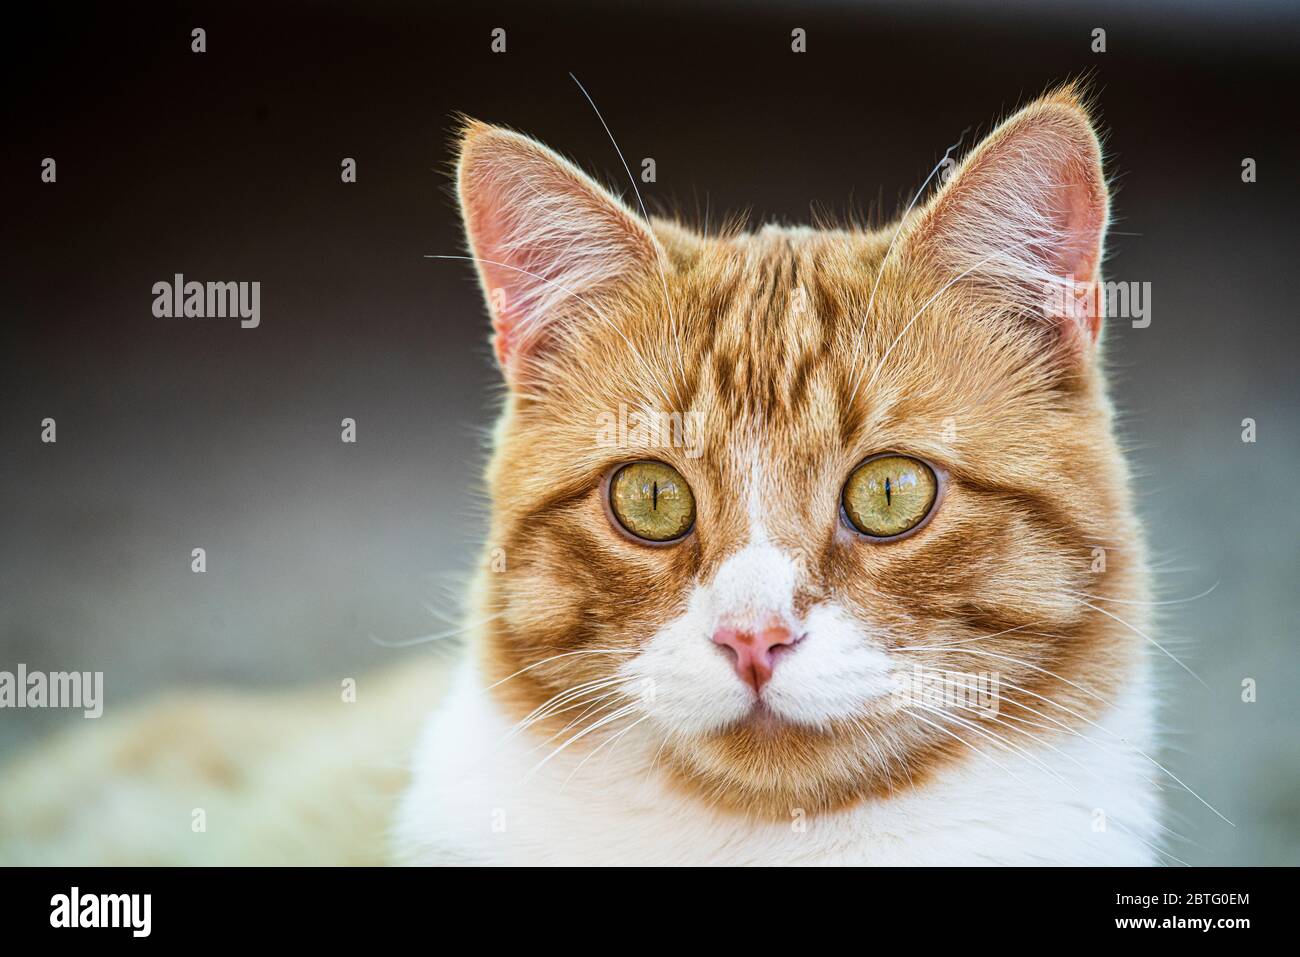 Portrait of a ginger tabby cat with green eyes white fur and stripes. Stock Photo